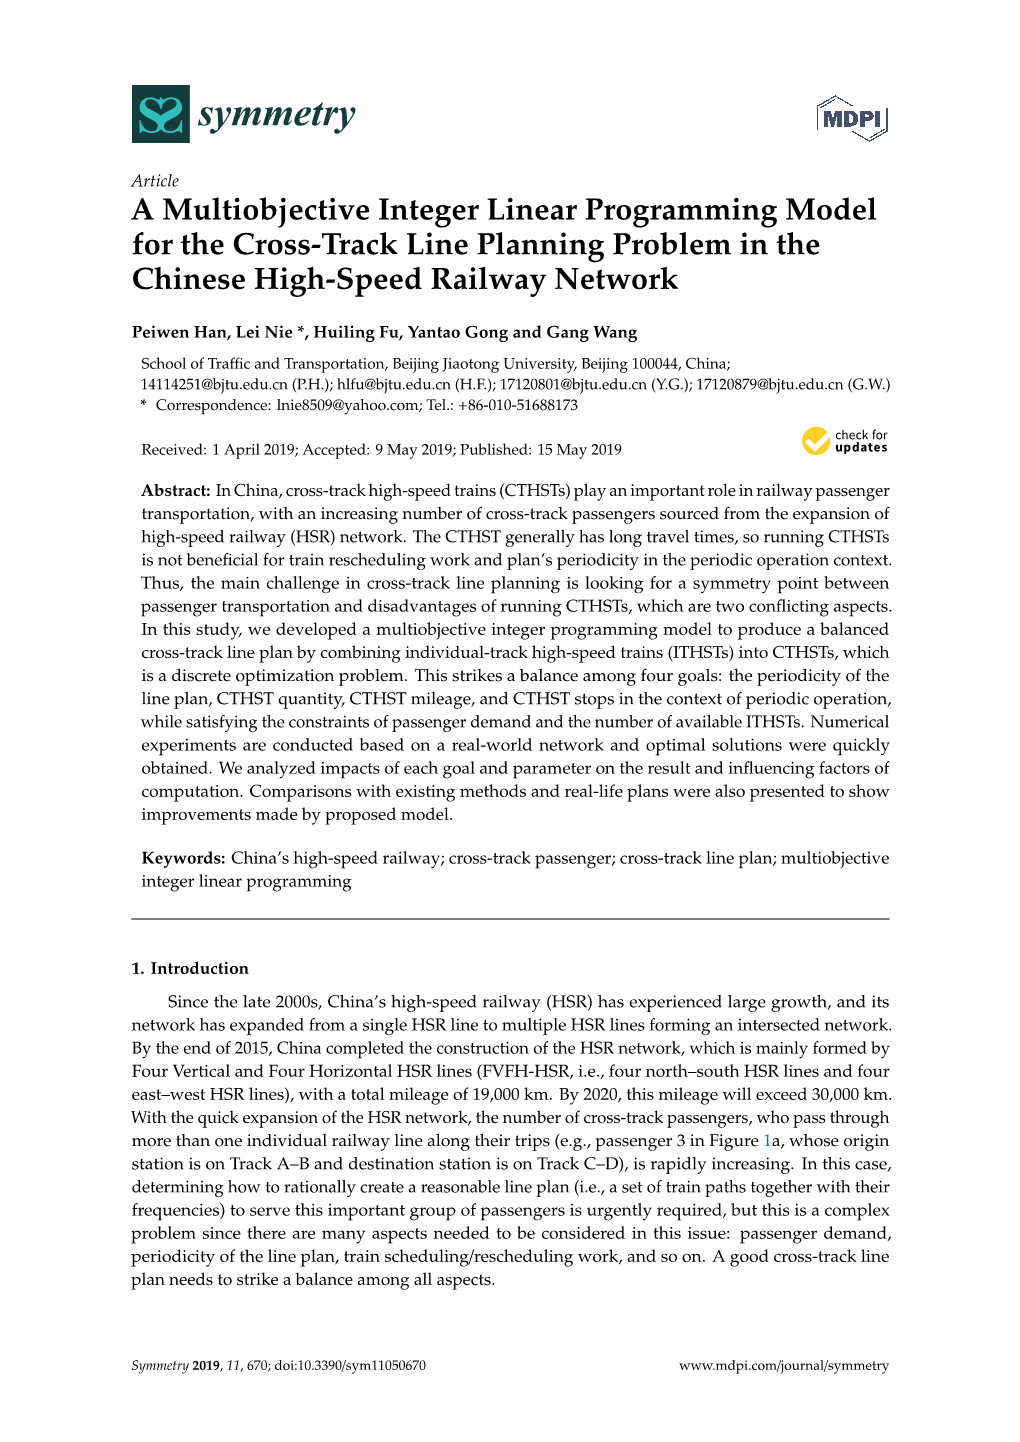 A Multiobjective Integer Linear Programming Model for the Cross-Track Line Planning Problem in the Chinese High-Speed Railway Network